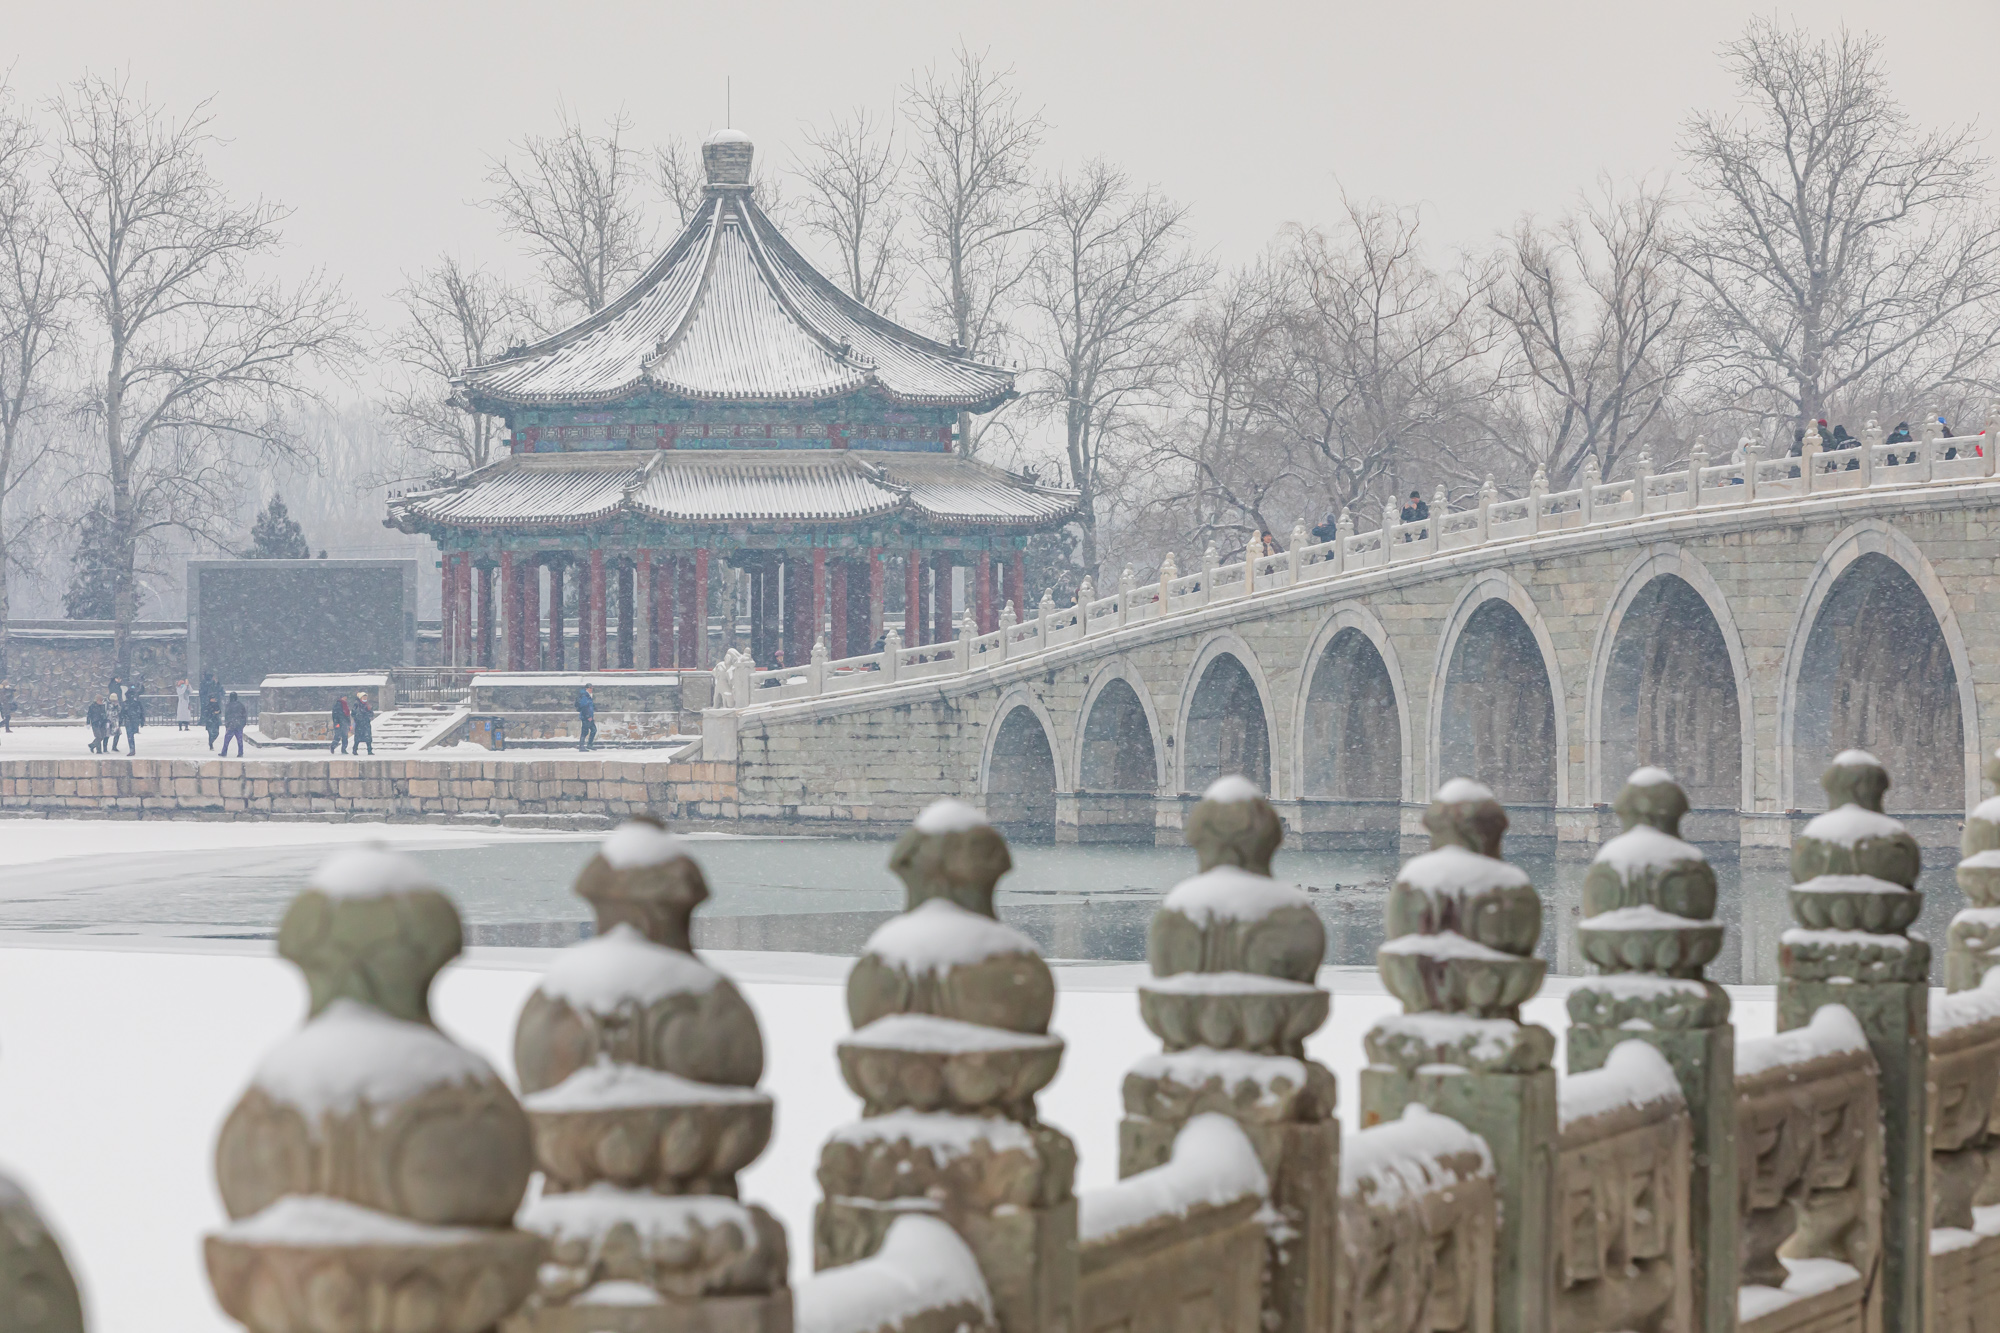 Got Photos of Beijing in the Snow? Share Them With Us!